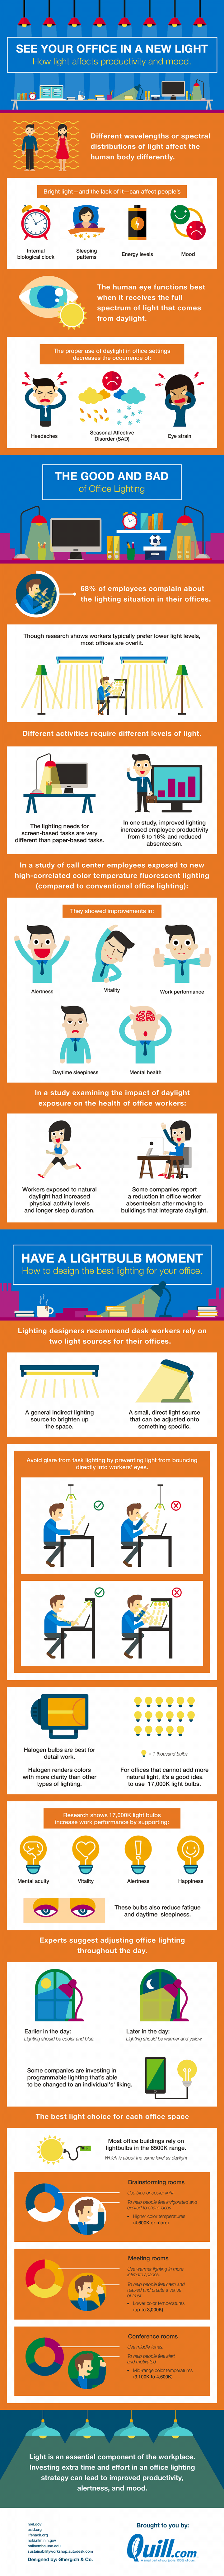 How to Improve Your Day With Lighting